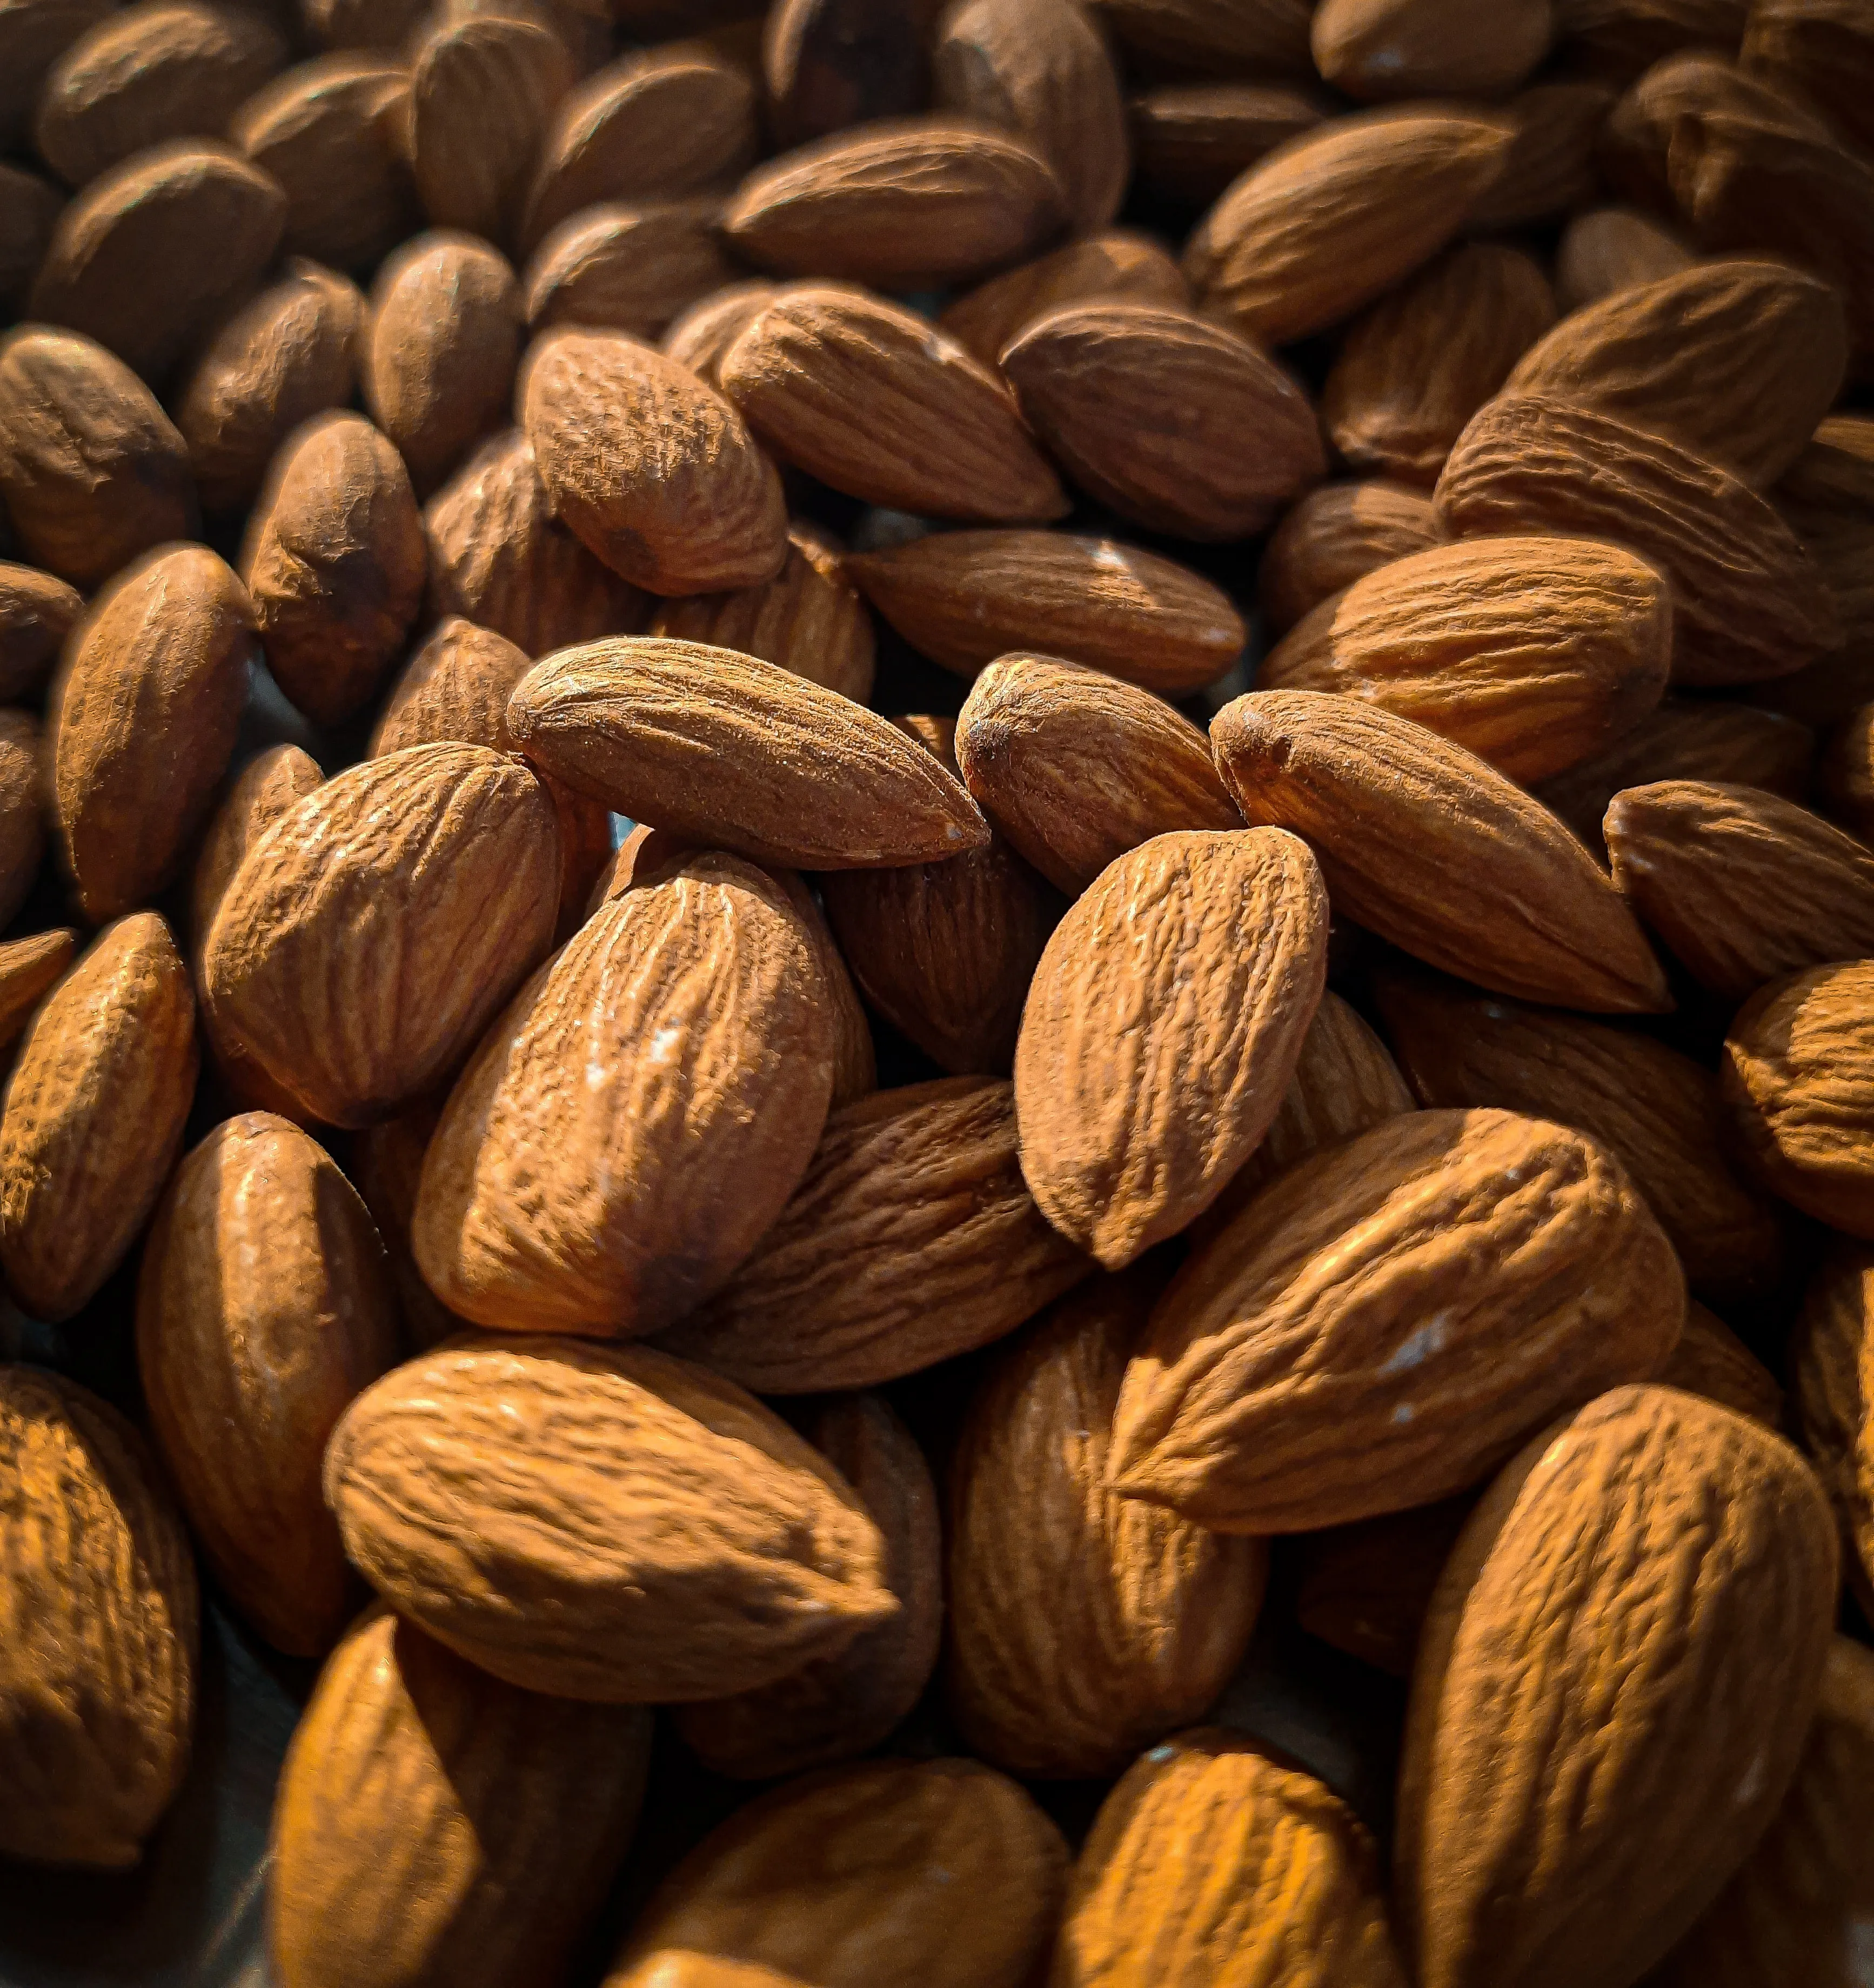 The price of almond dry fruits 1kg  + purchase and sale of almond dry fruits 1kg wholesale